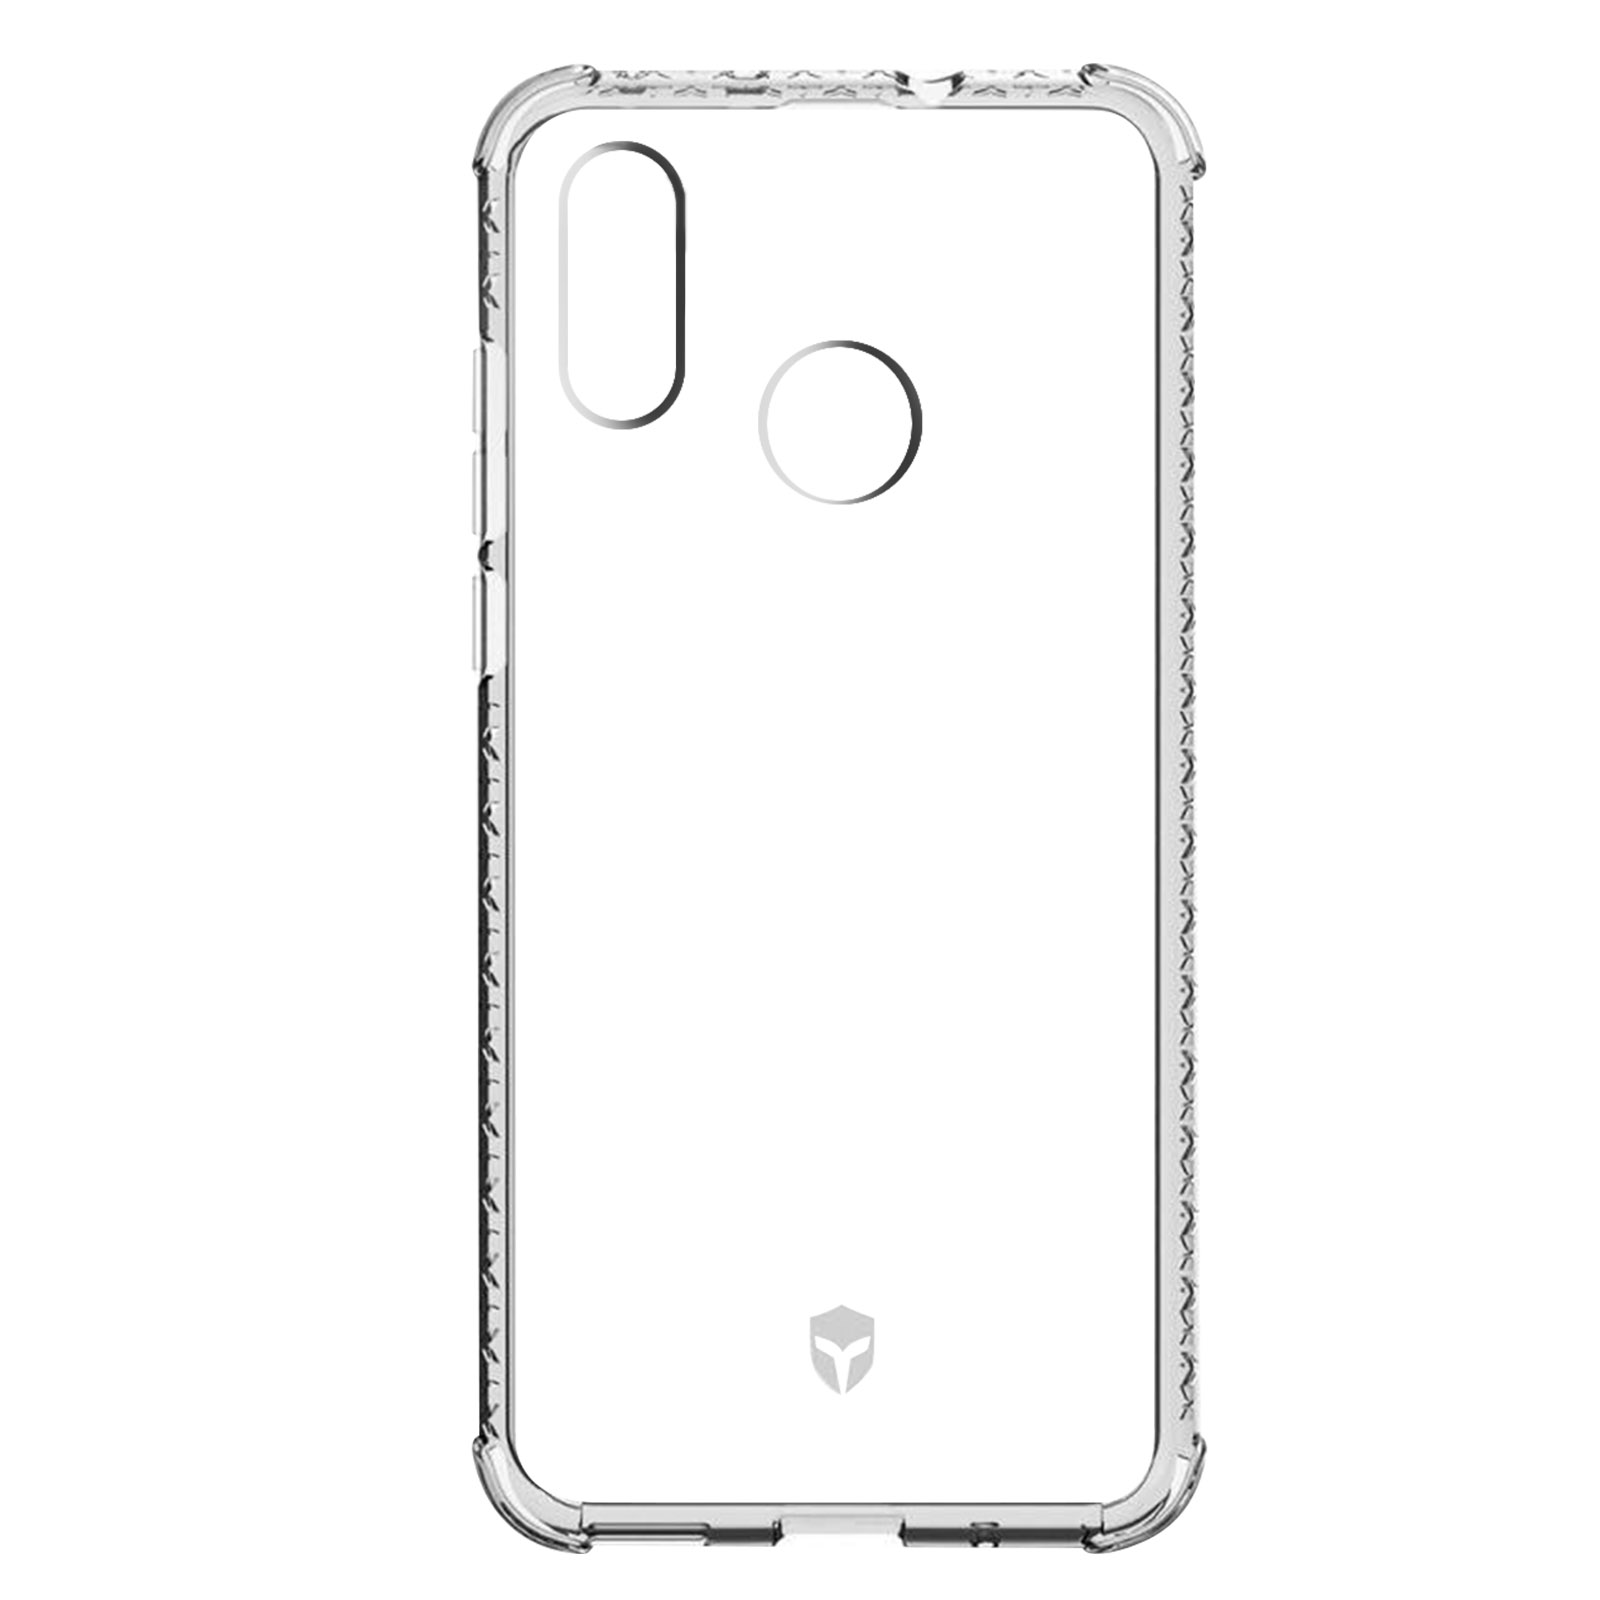 FORCE CASE Air Handyhülle P20 Huawei, Backcover, Transparent Lite, Series